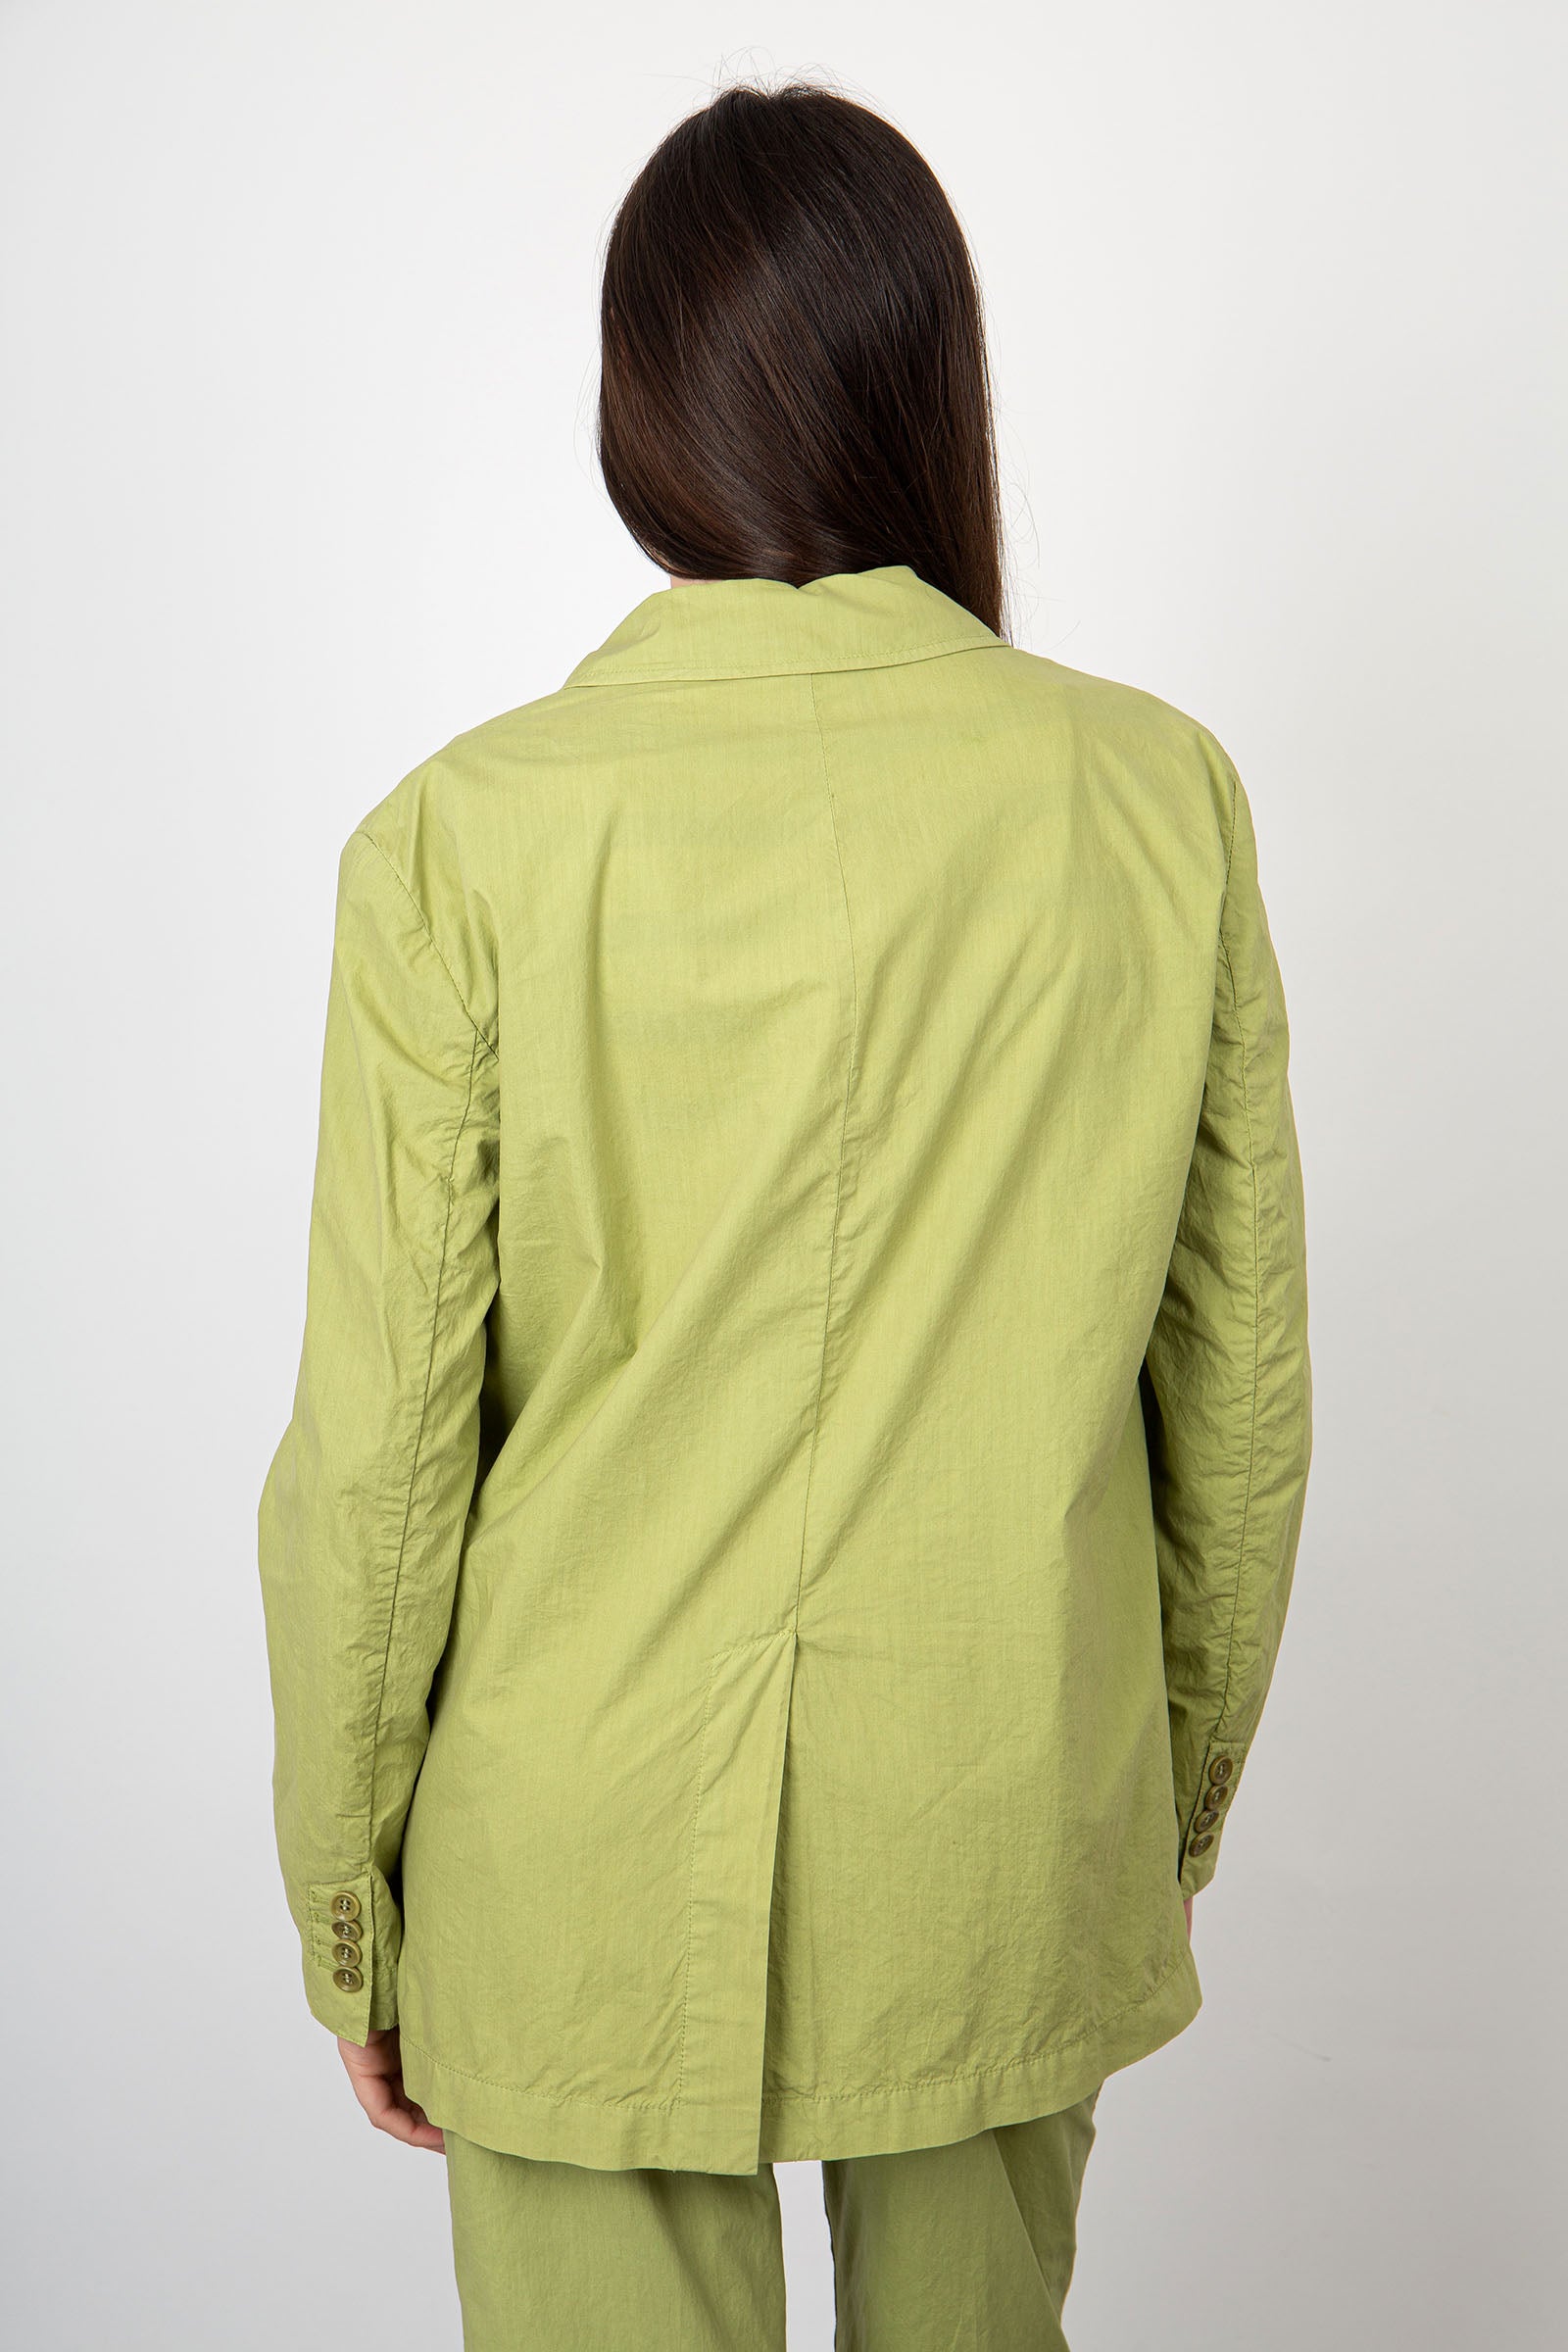 Aspesi Double Breasted Cotton Green Jacket - 4